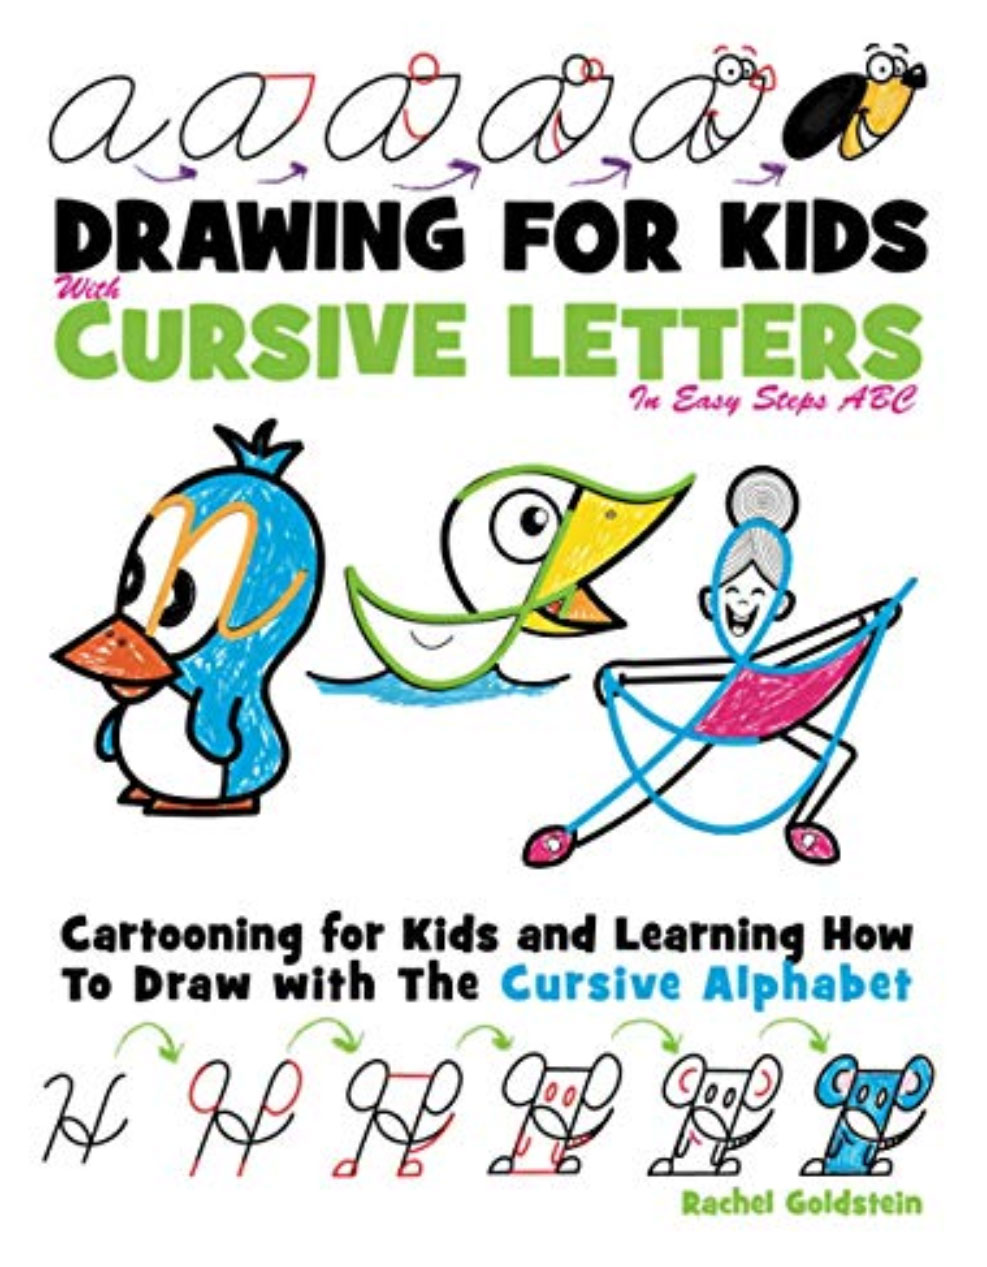 drawingfor kids book - cartooning with cursive letters